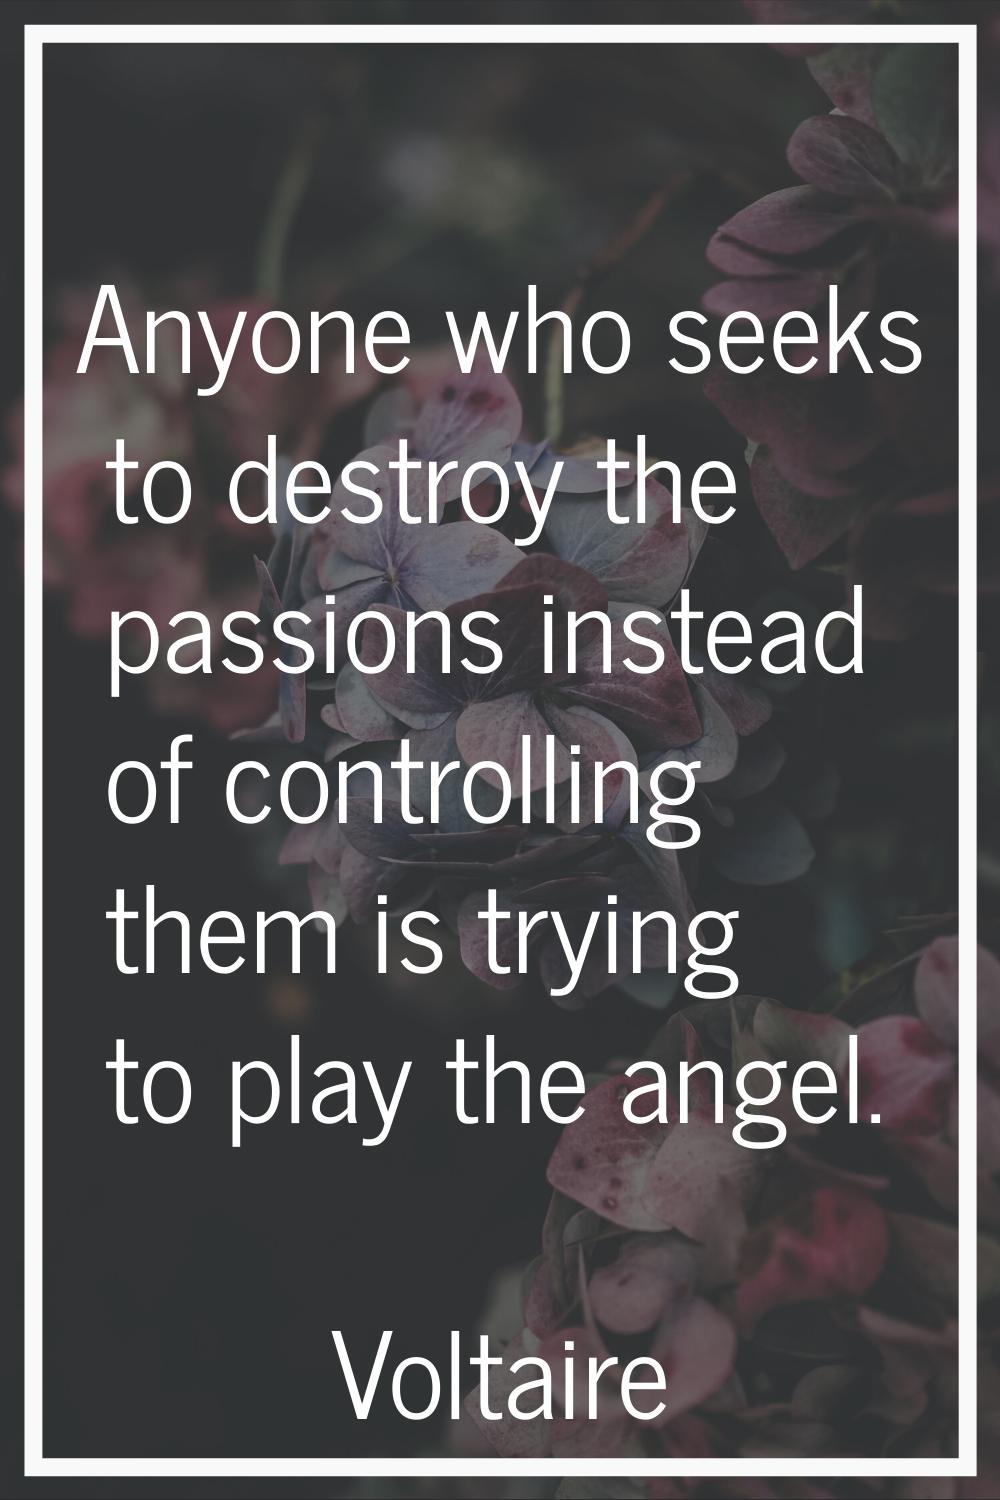 Anyone who seeks to destroy the passions instead of controlling them is trying to play the angel.